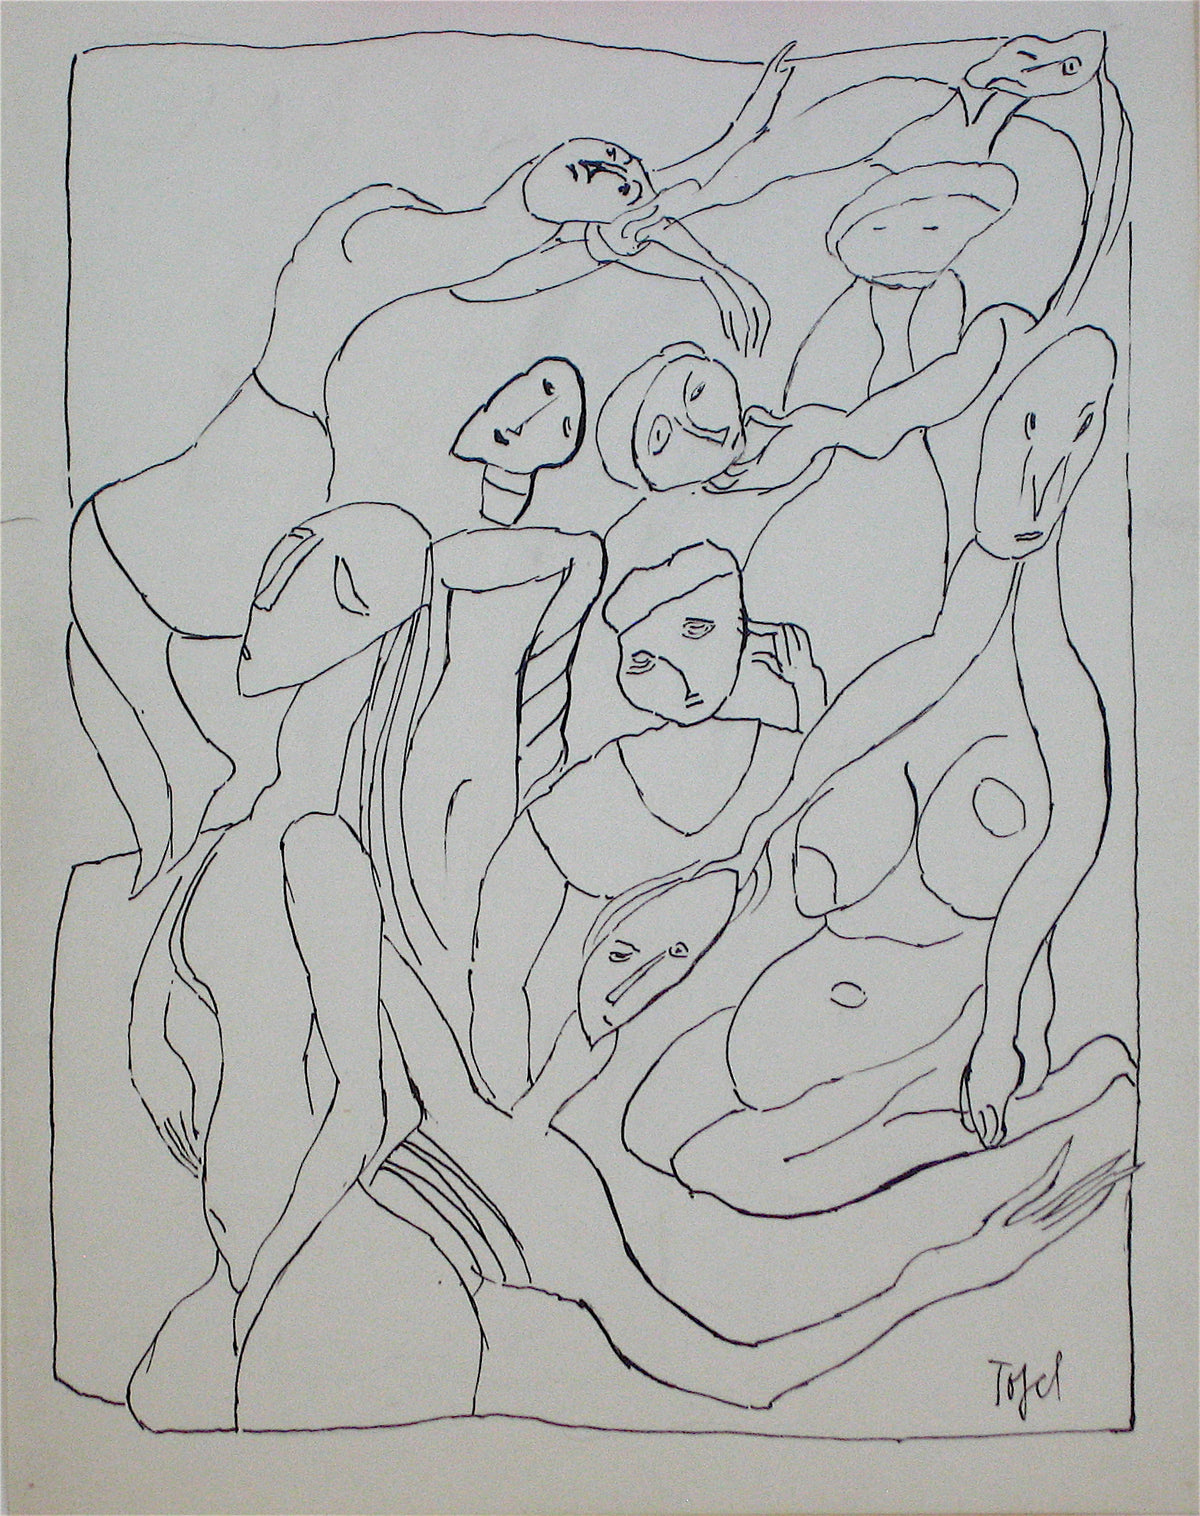 Abstracted Figures &lt;br&gt;Early 20th Century Ink&lt;br&gt;&lt;br&gt;#11216